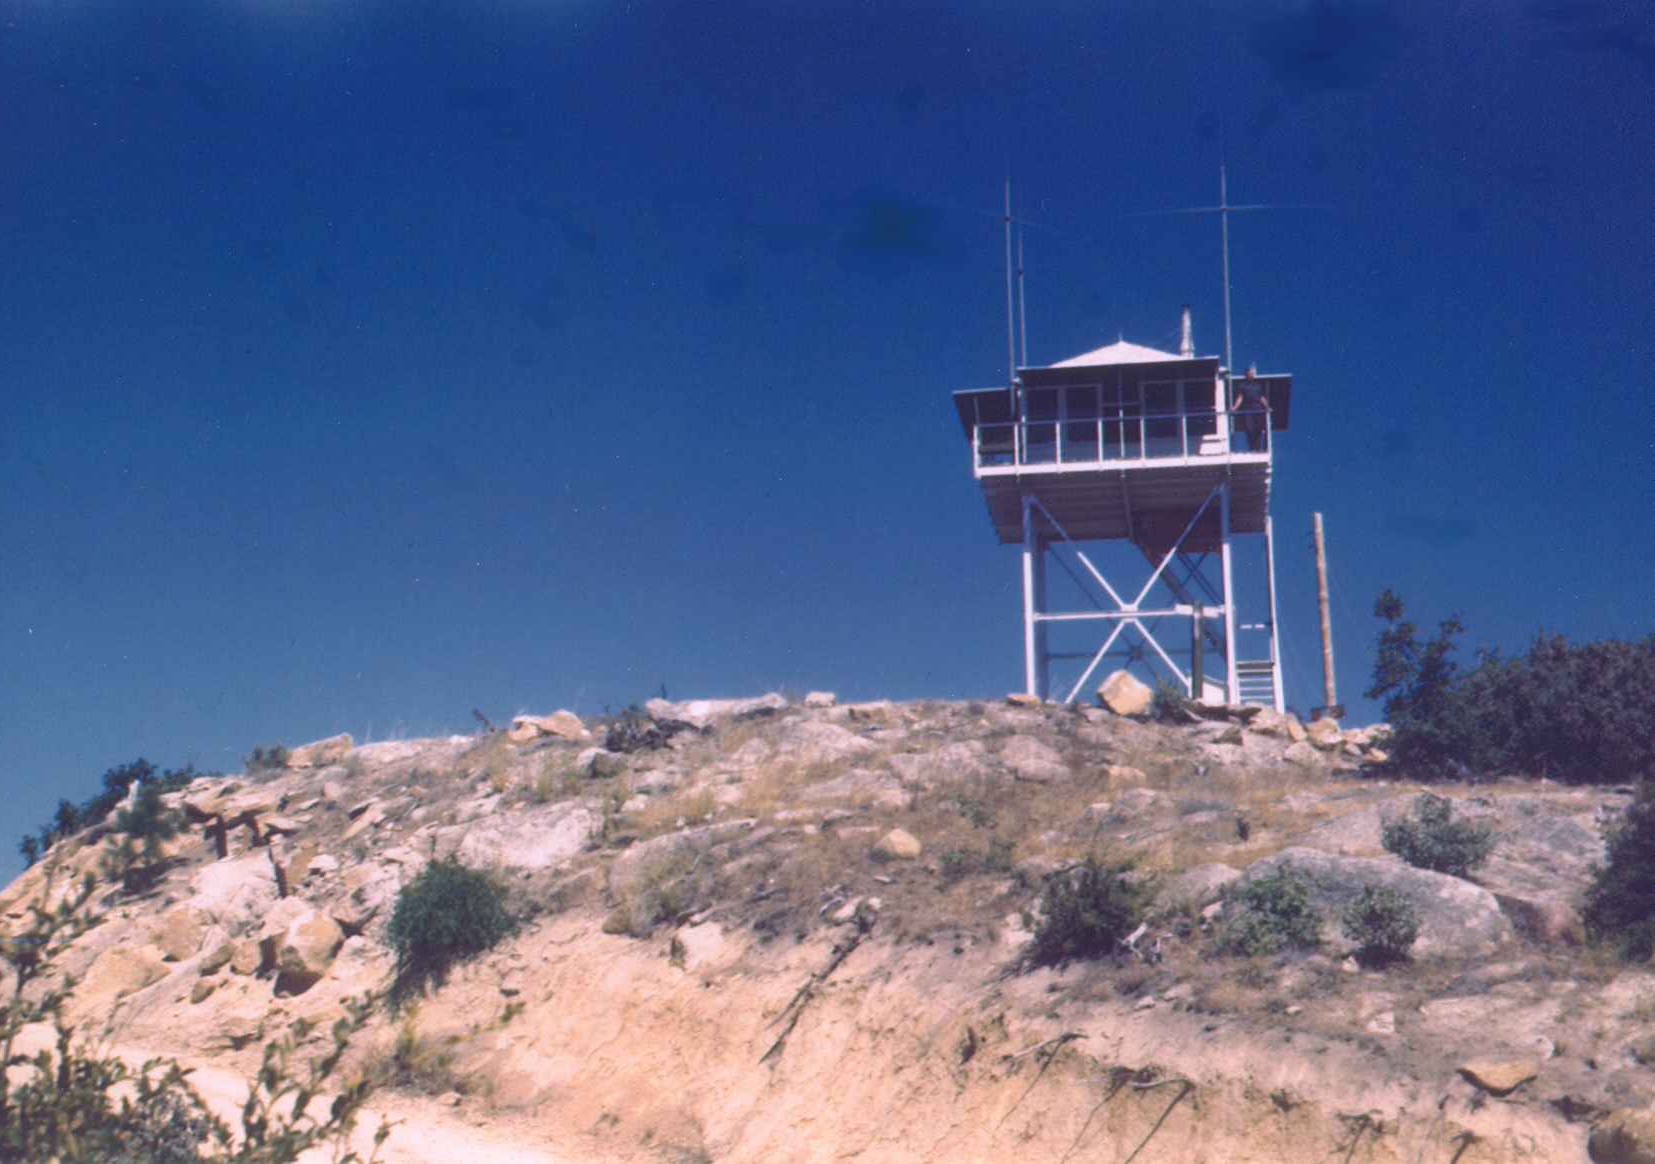 Goat Mountain fire lookout picture